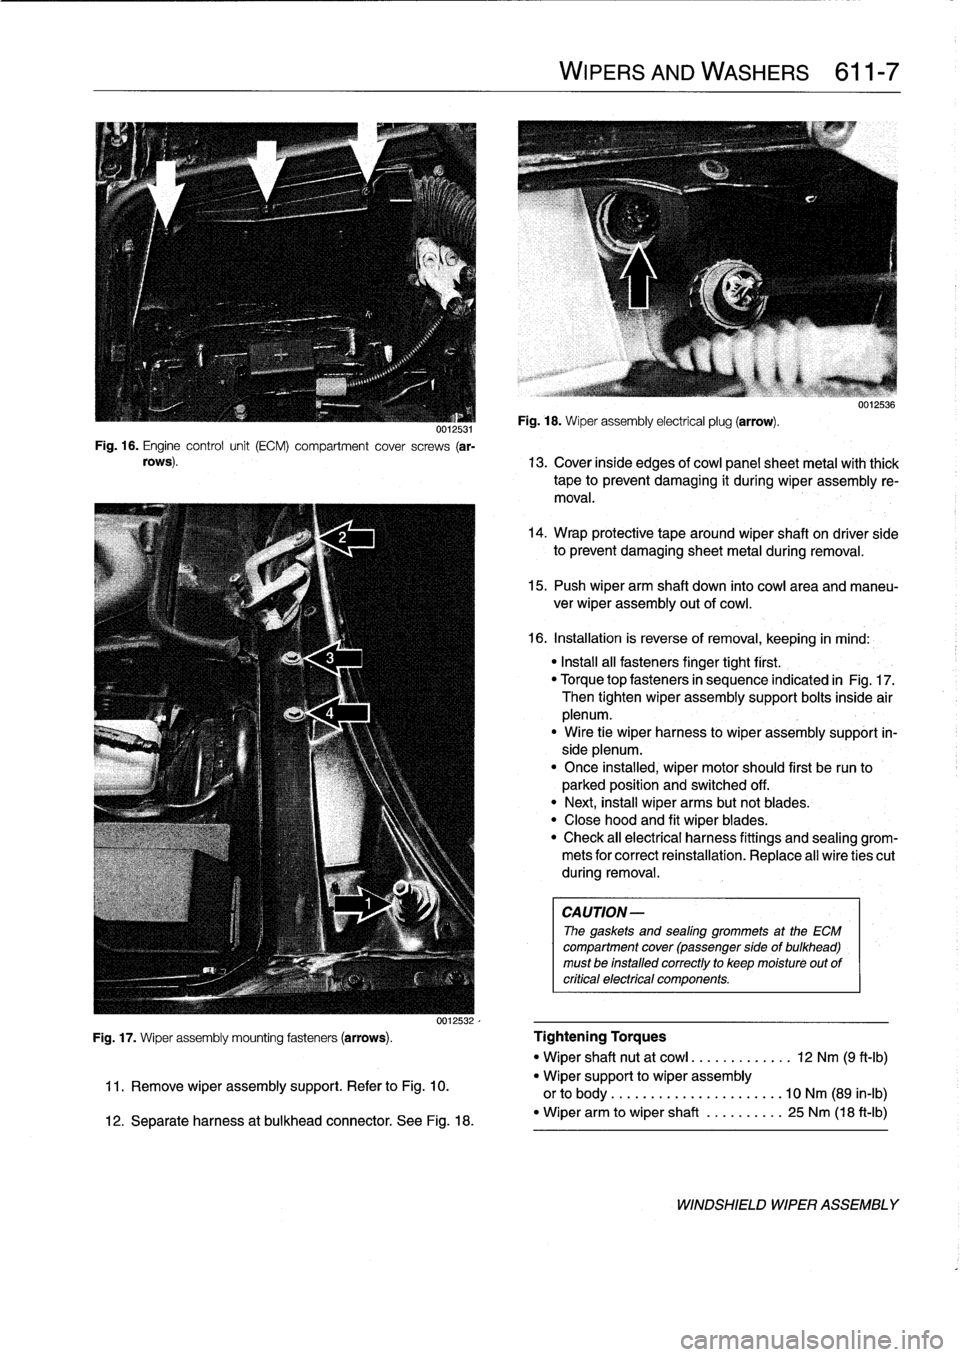 BMW 325i 1994 E36 Workshop Manual 
0012531Fig
.
16
.
Engine
control
unit
(ECM)
compartment
cover
screws
(ar-
rows)
.

WIPERS
AND
WASHERS

	

611-
7

Fig
.
18
.
Wiper
assembly
electrical
plug
(arrow)
.

uu1zbs6

13
.
Cover
inside
edges